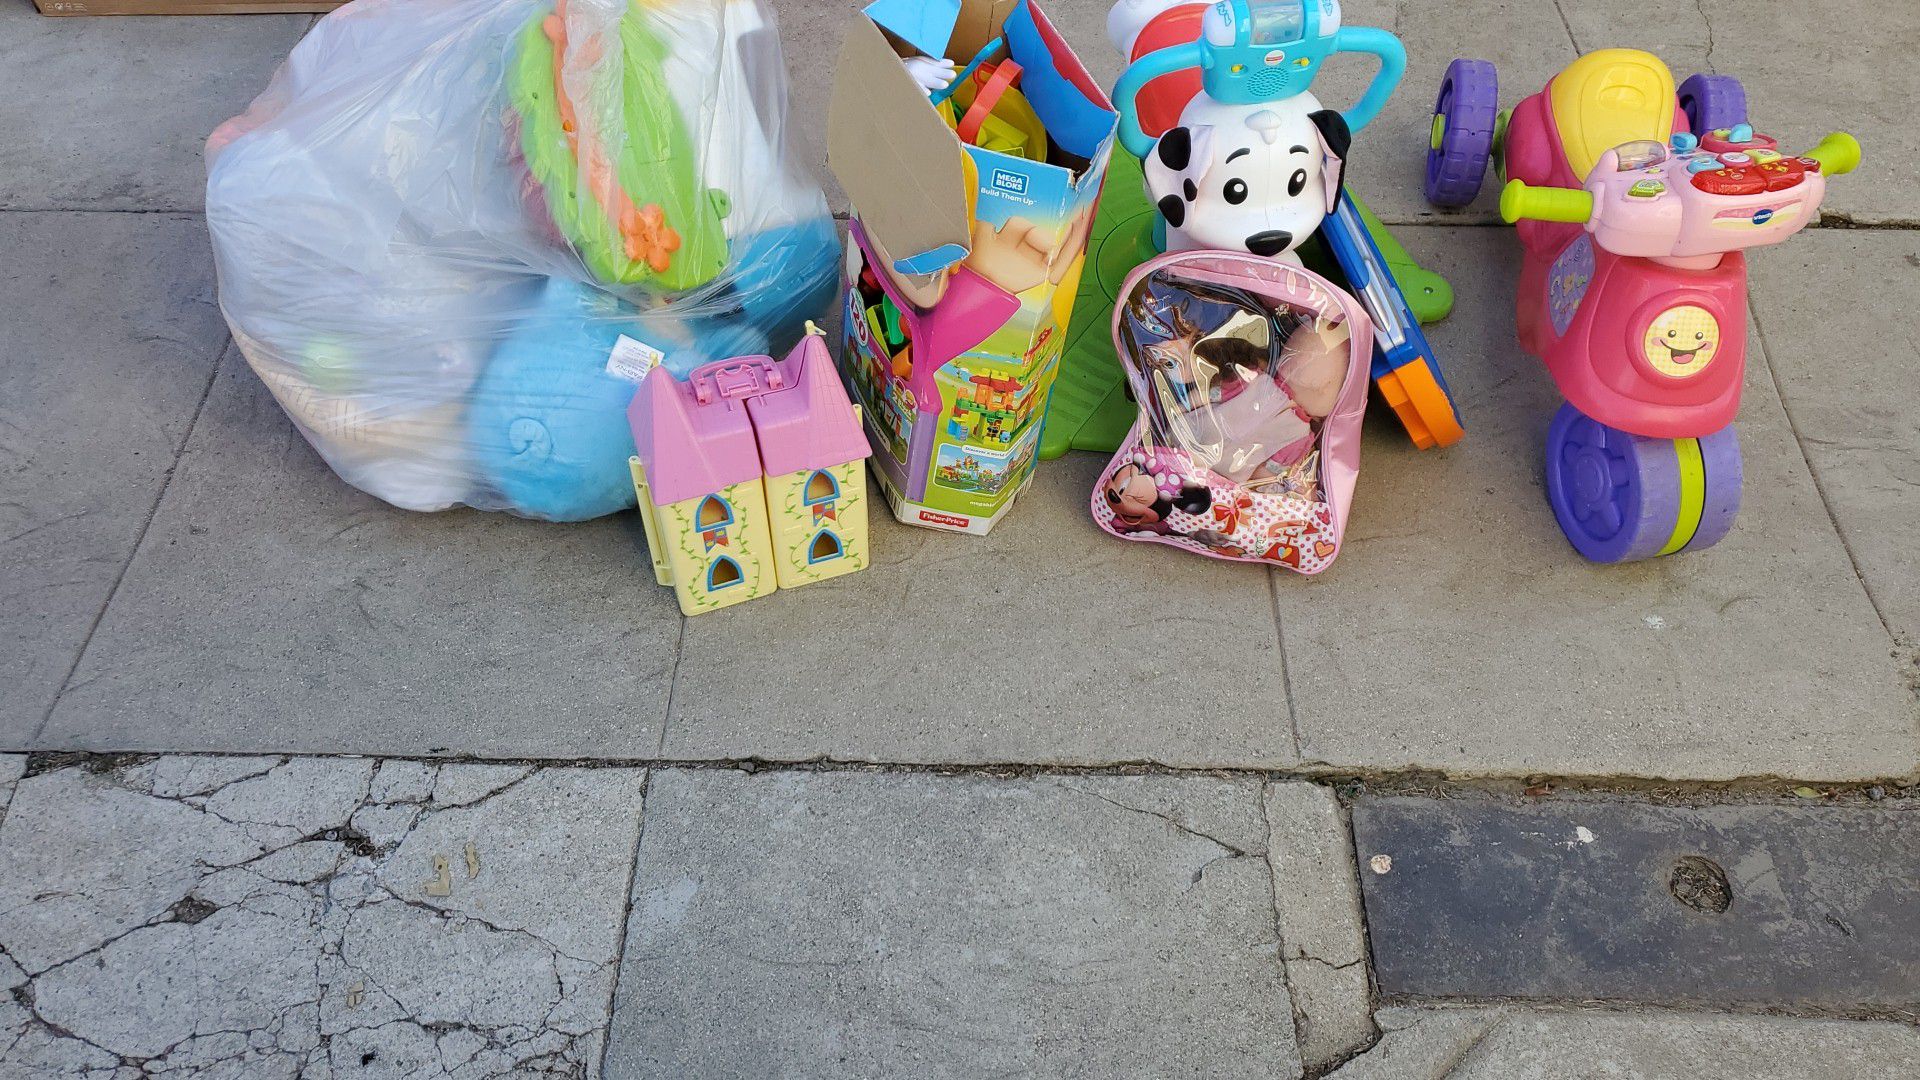 Free kids toys . Mostly girl toys